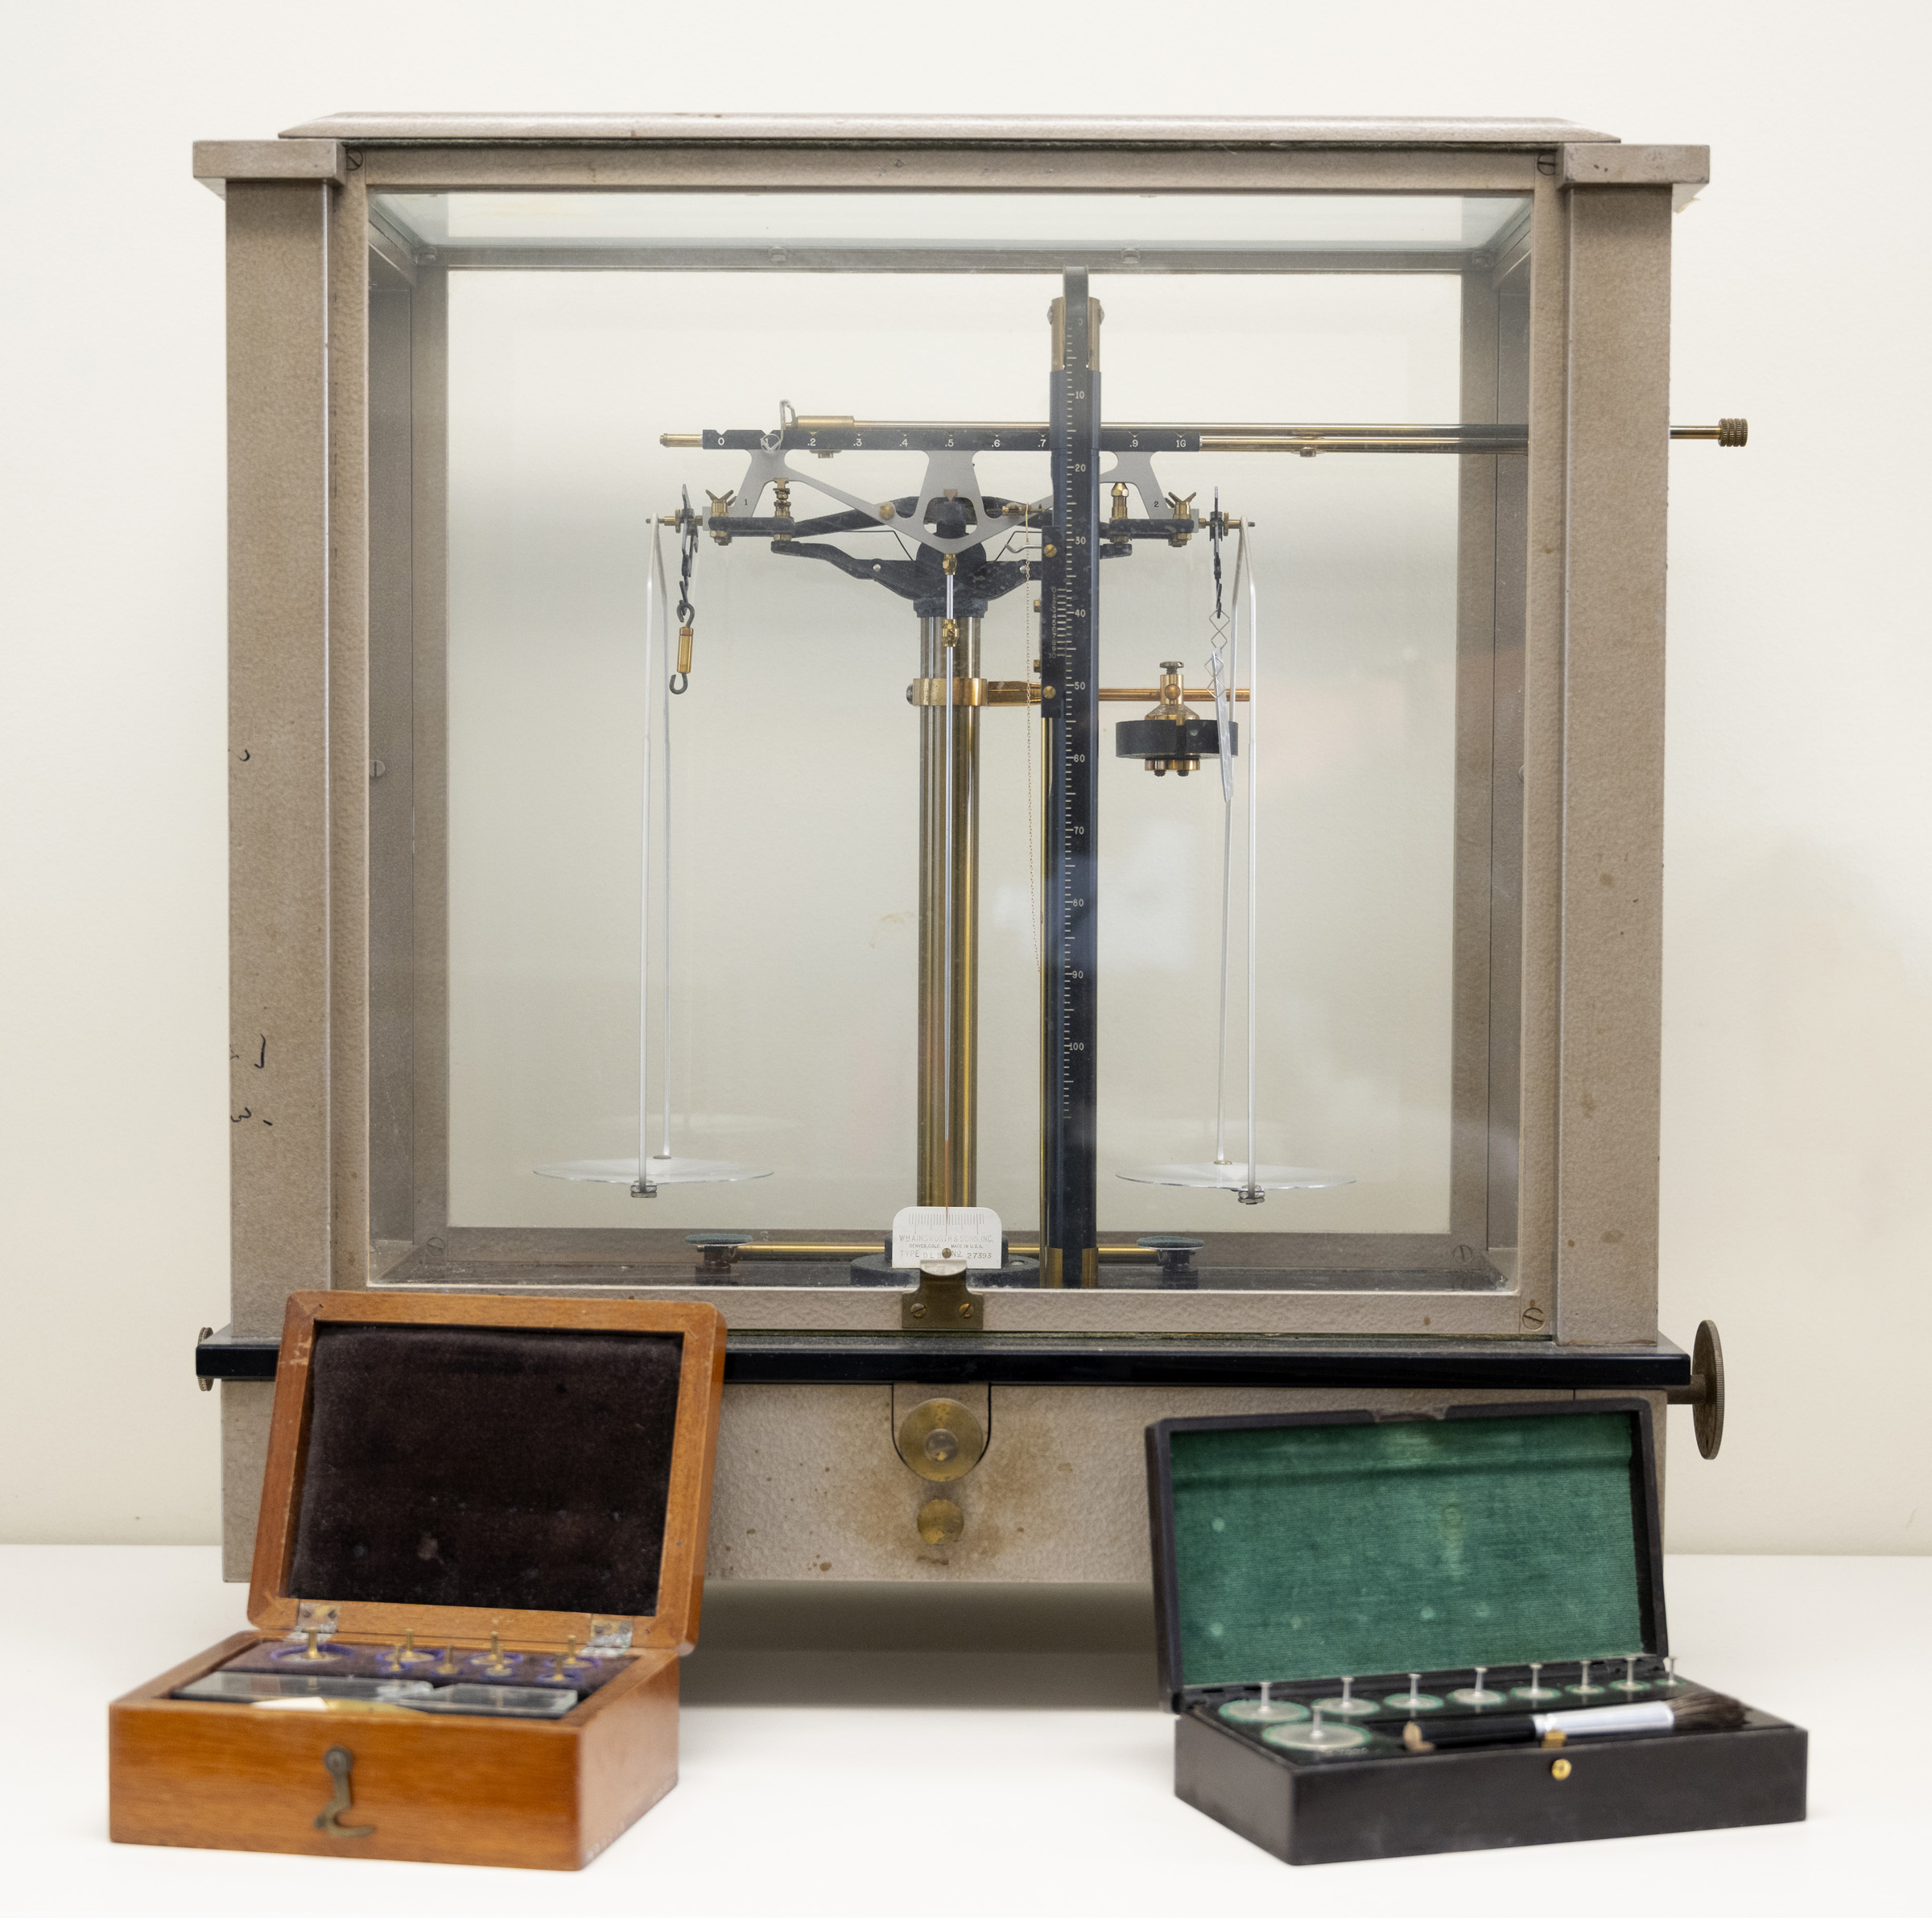 Set of scales in a glass and metal case with two small boxes of weights in front.